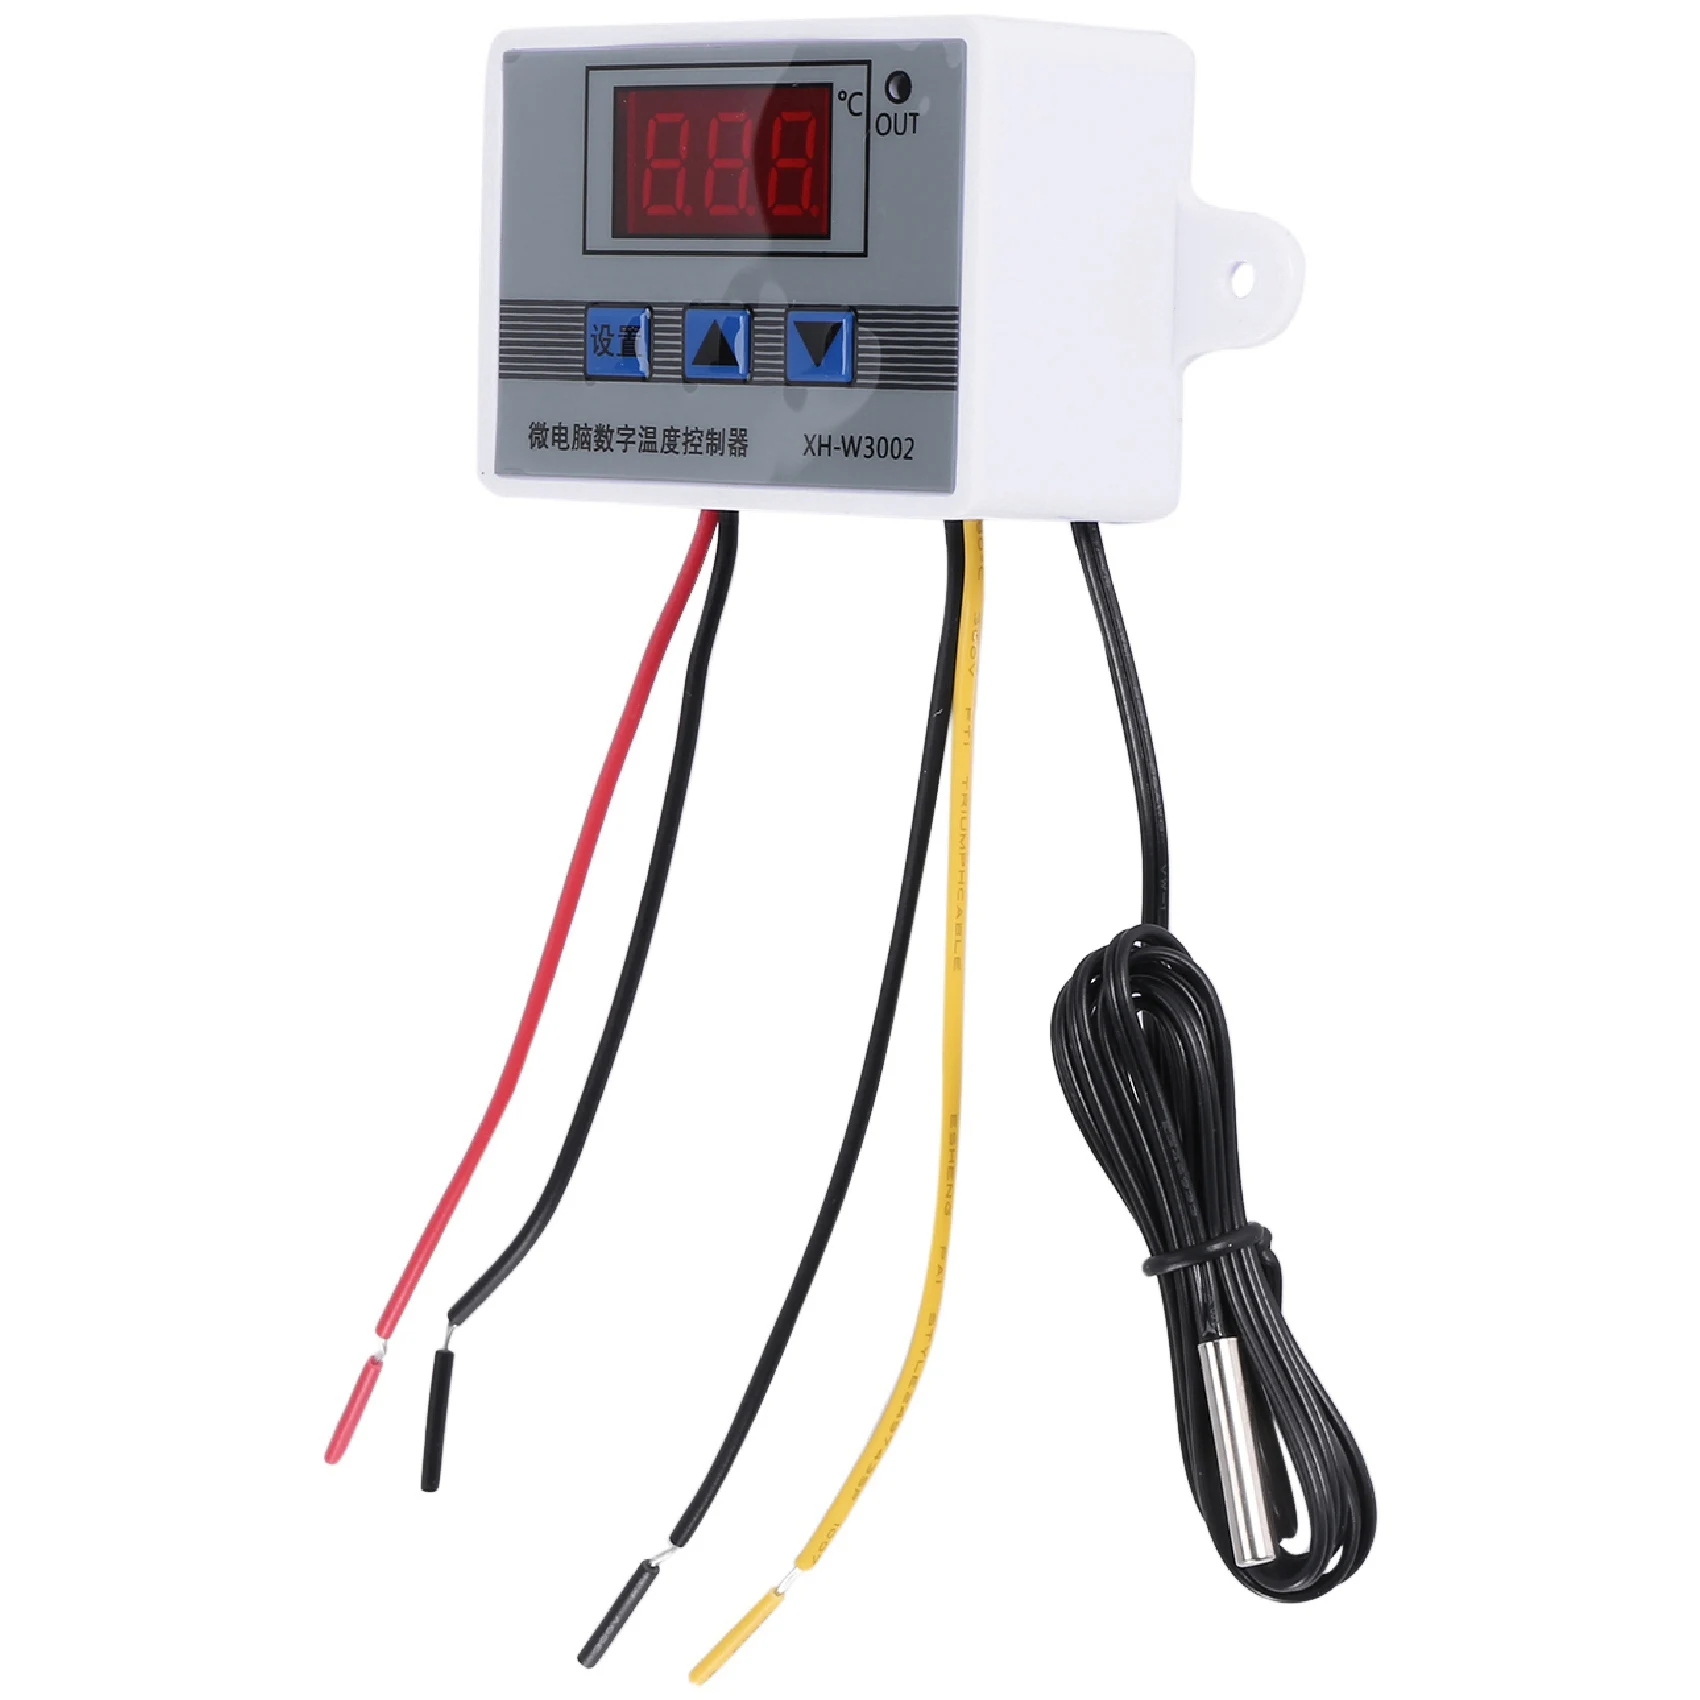 

XH-W3002 220V Digital LED Temperature Controller 10A Thermostat Control Switch Probe with Waterproof Sensor W3002